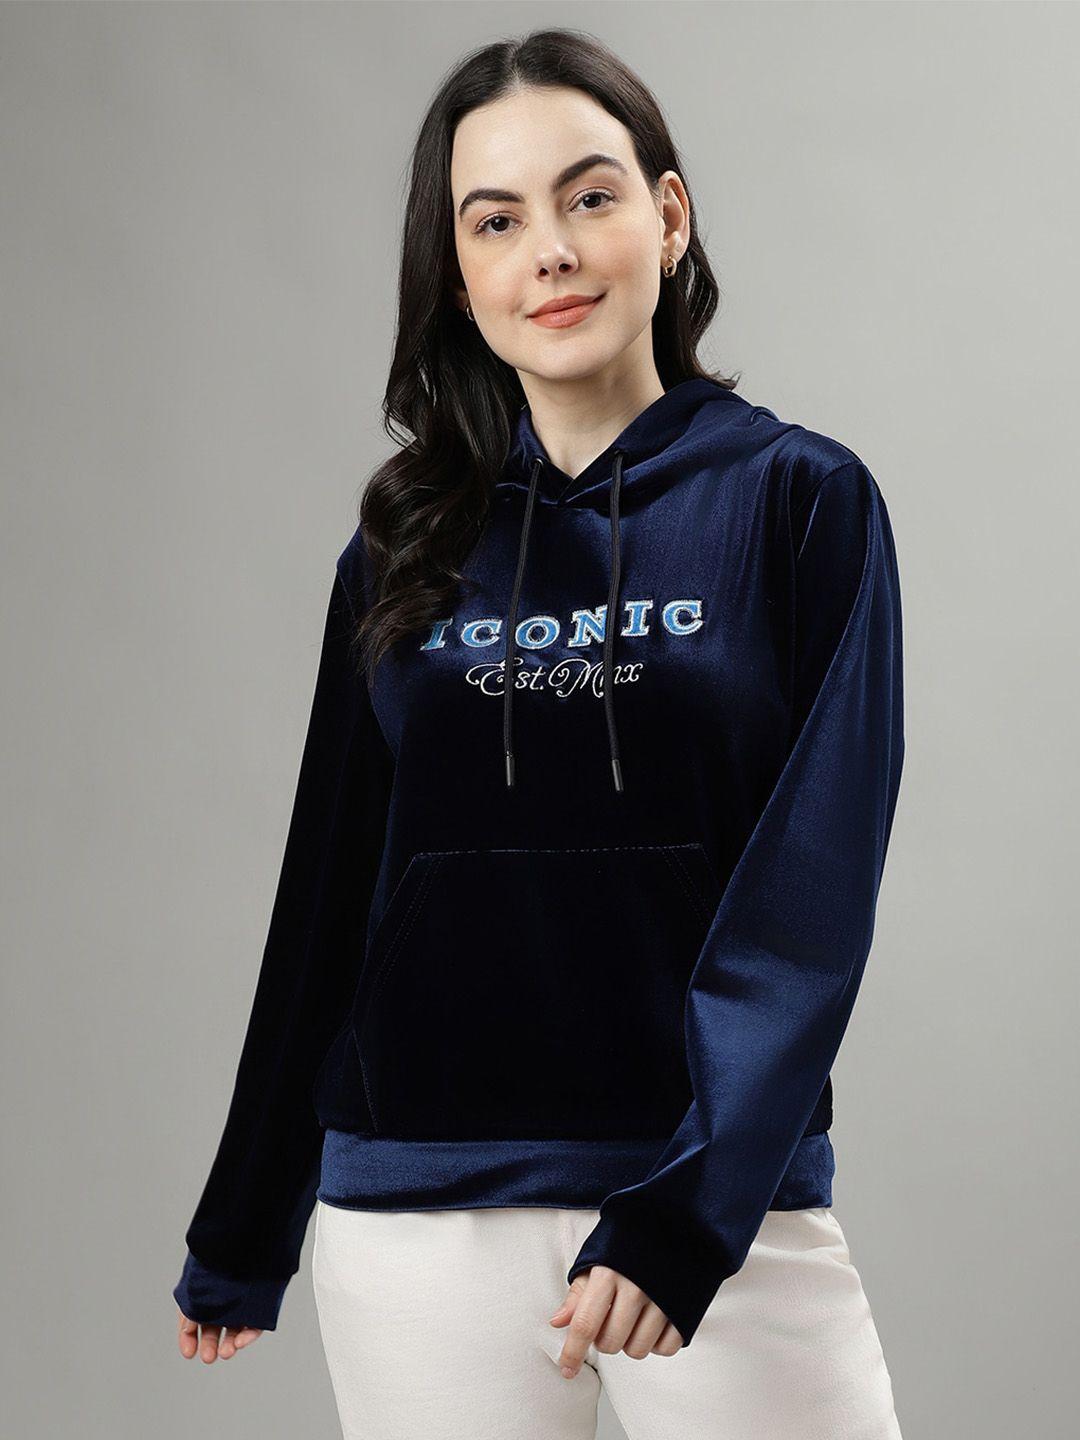 iconic typography printed hooded pullover sweatshirt